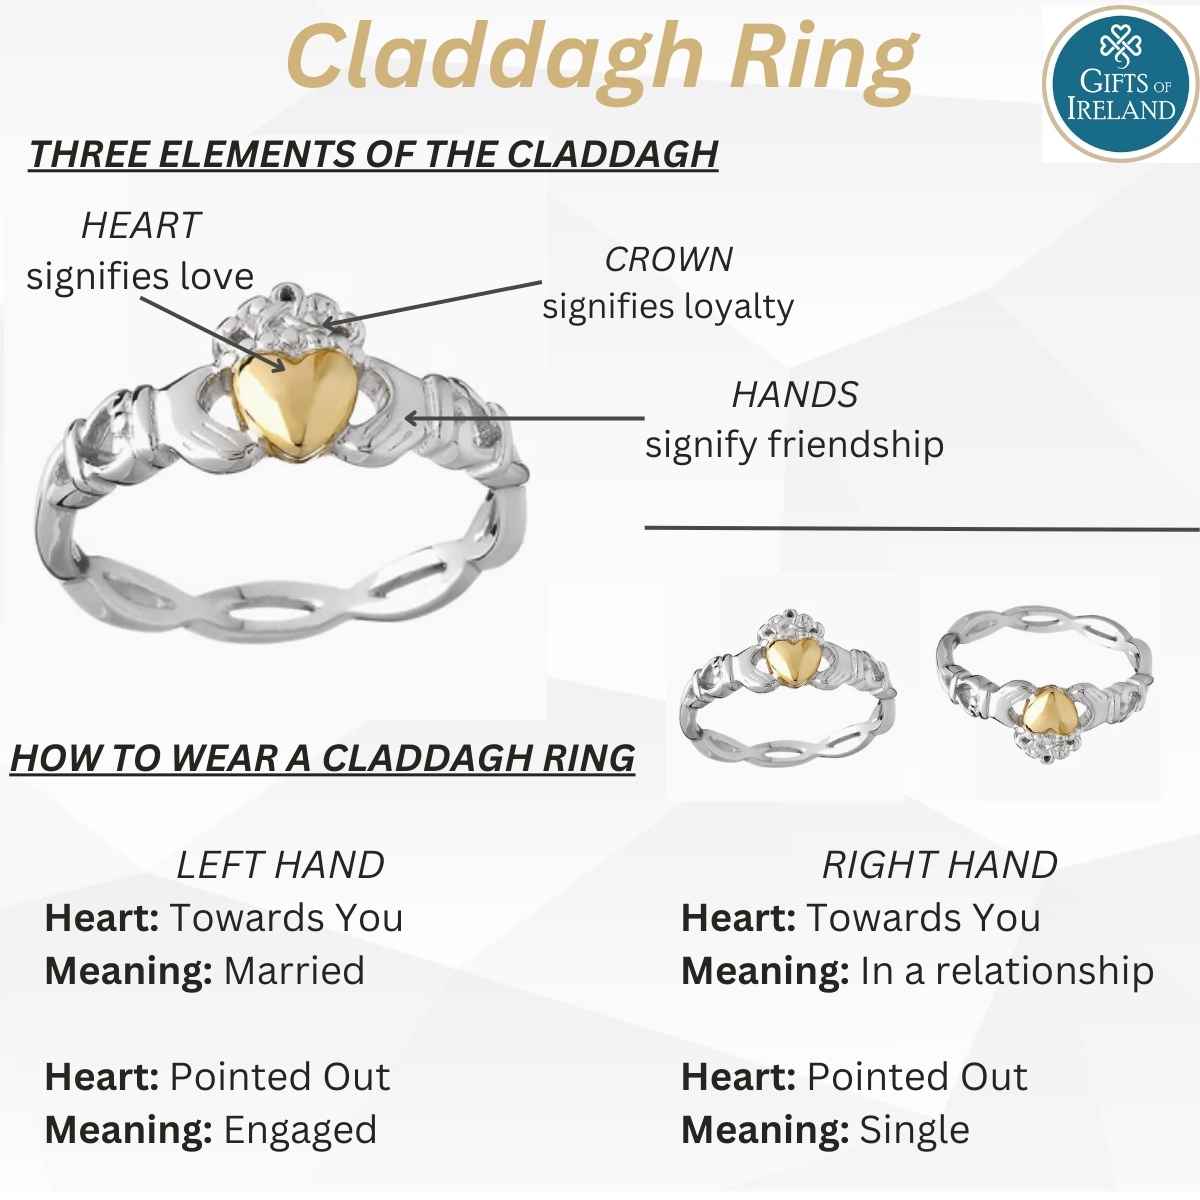 Shanore Gold Claddagh Birthstone Ring - May